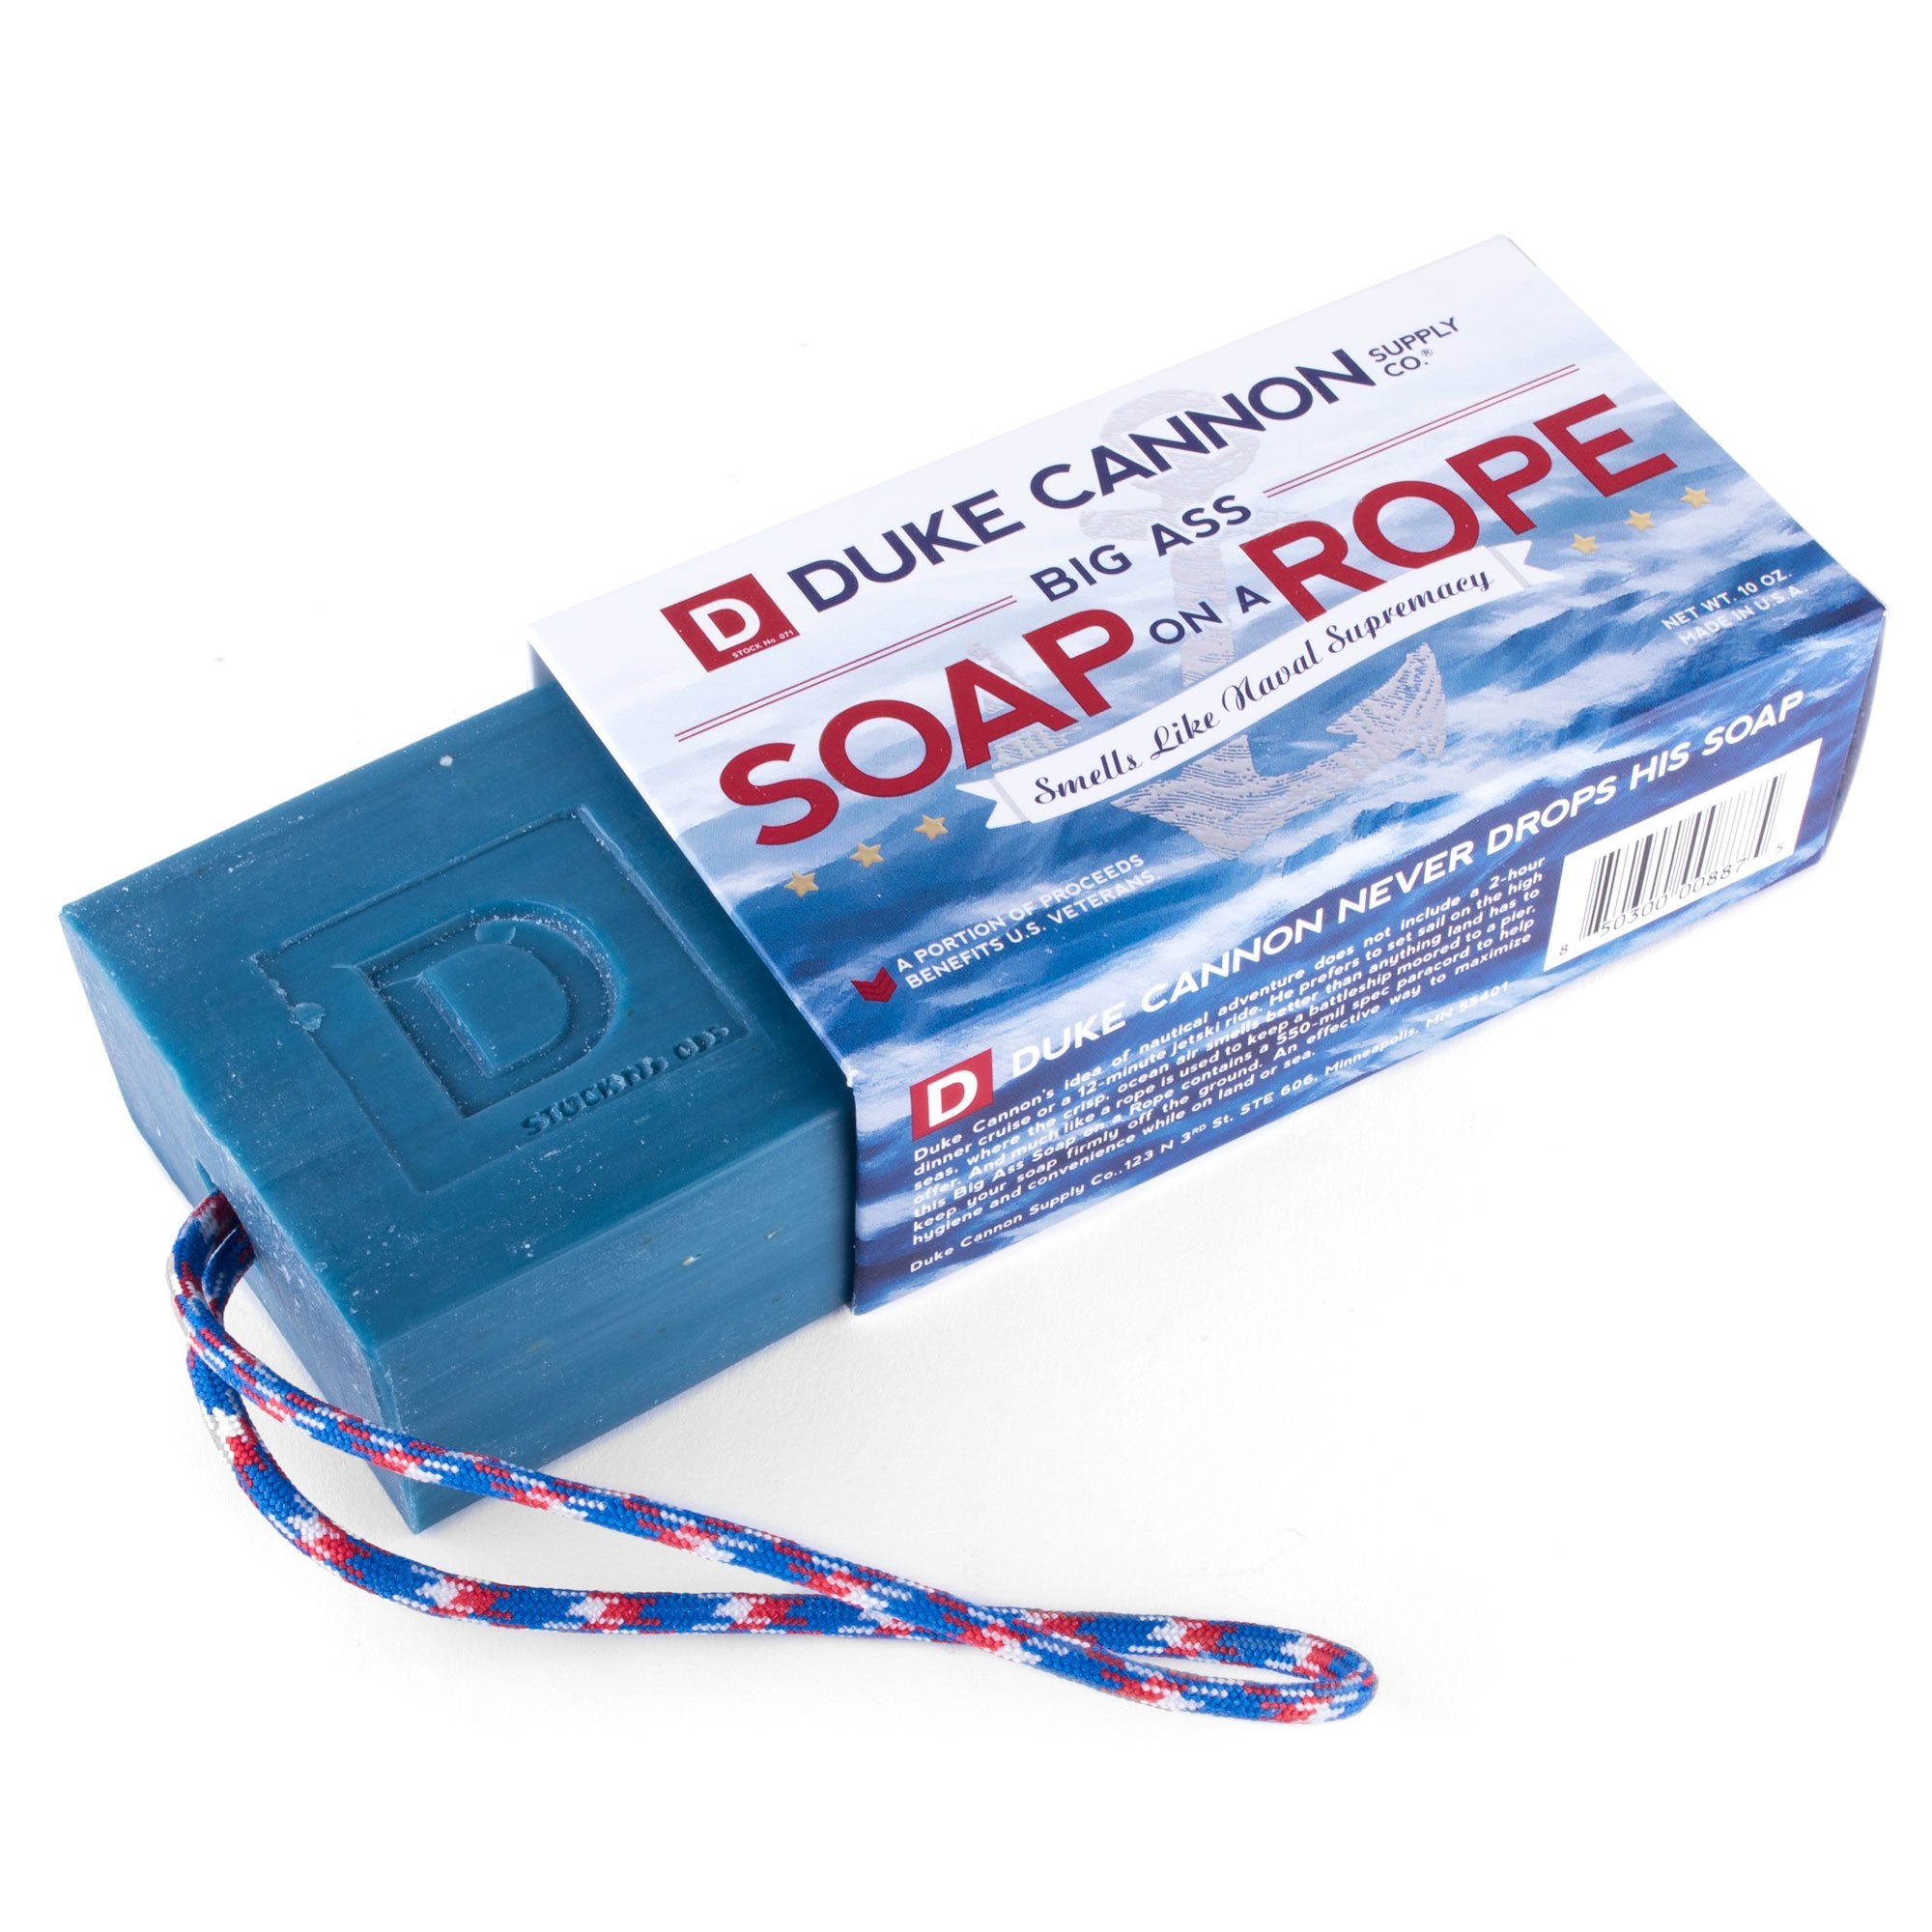 Duke Cannon Big Ass Soap on a Rope - Naval Supremacy    